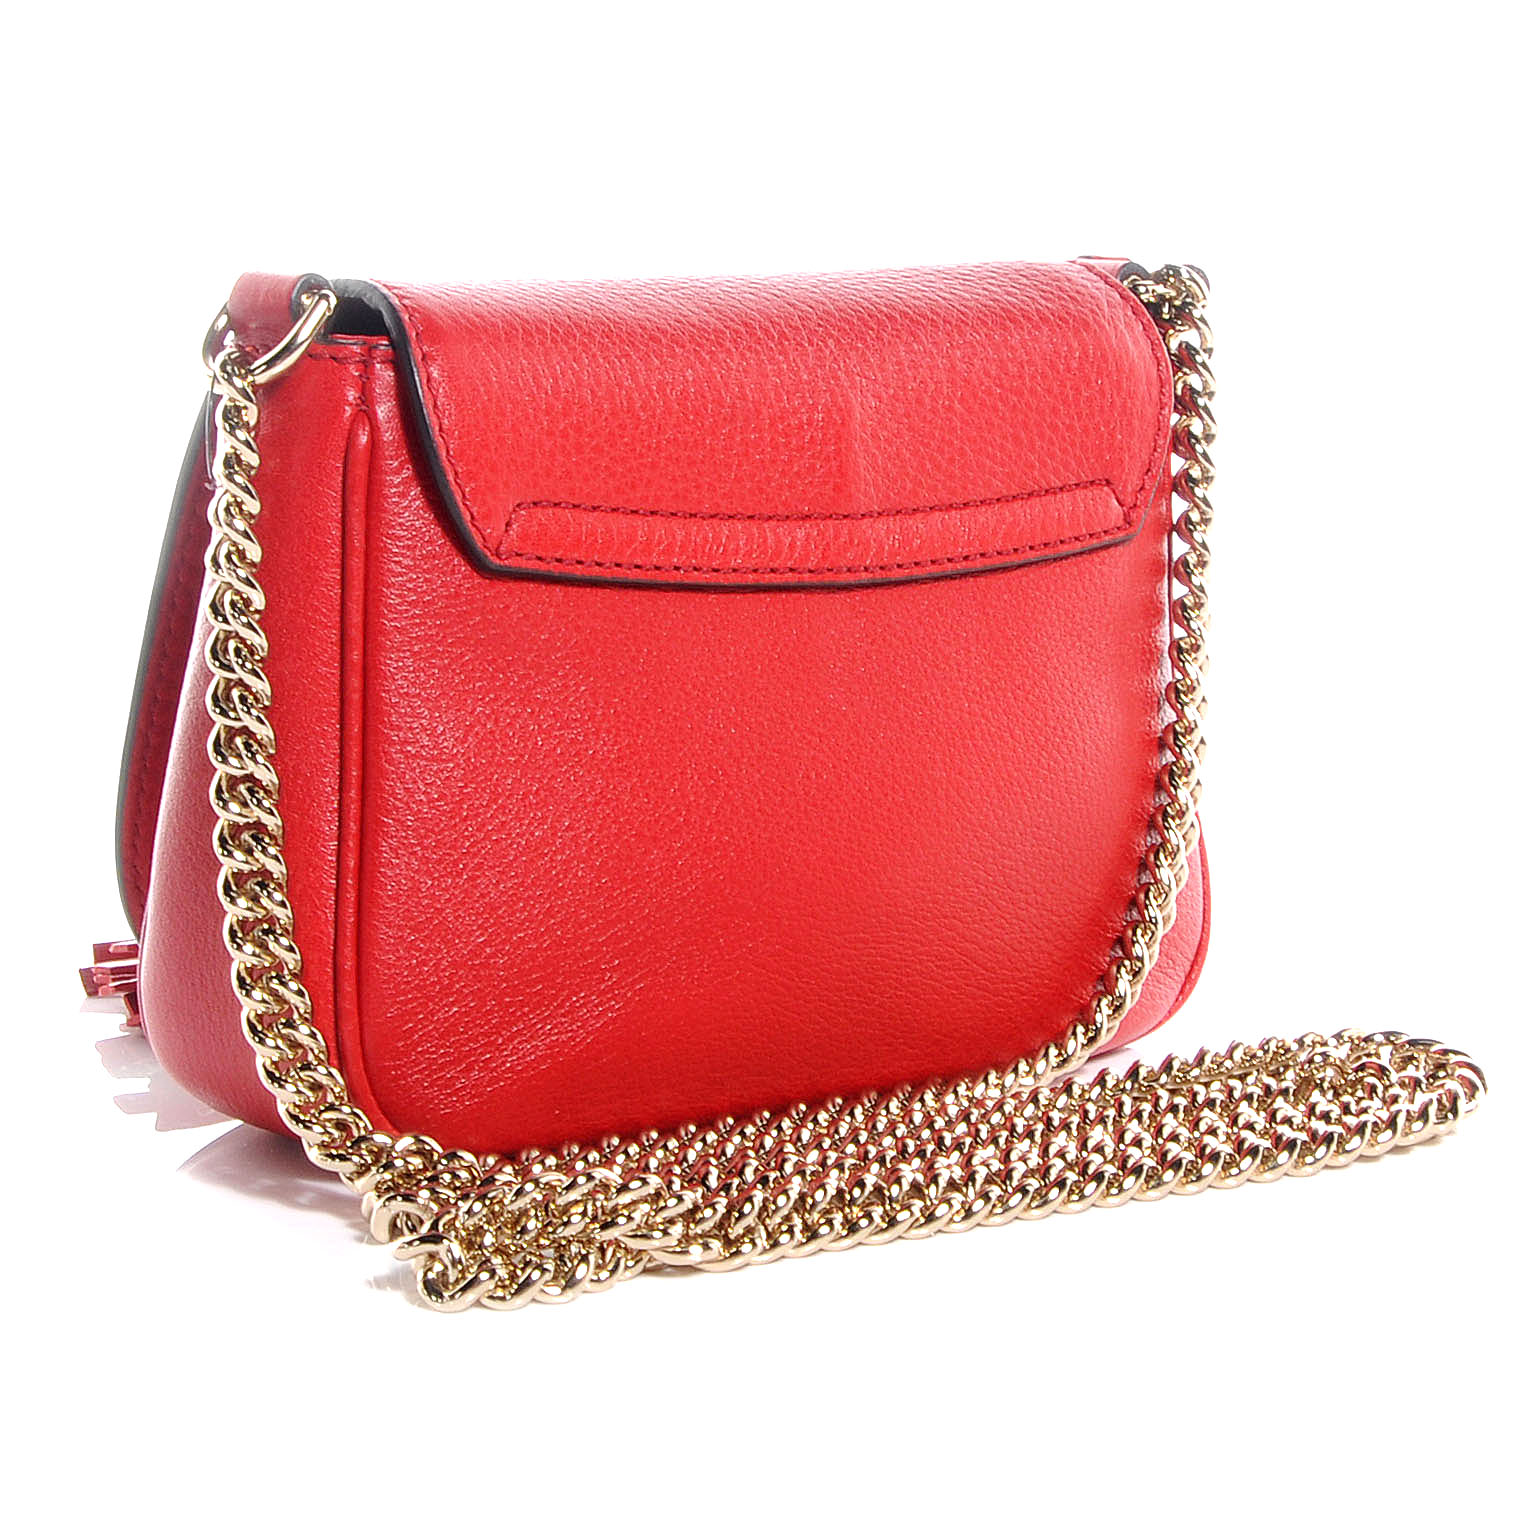 GUCCI Leather Small Soho Chain Shoulder Bag Red 56067